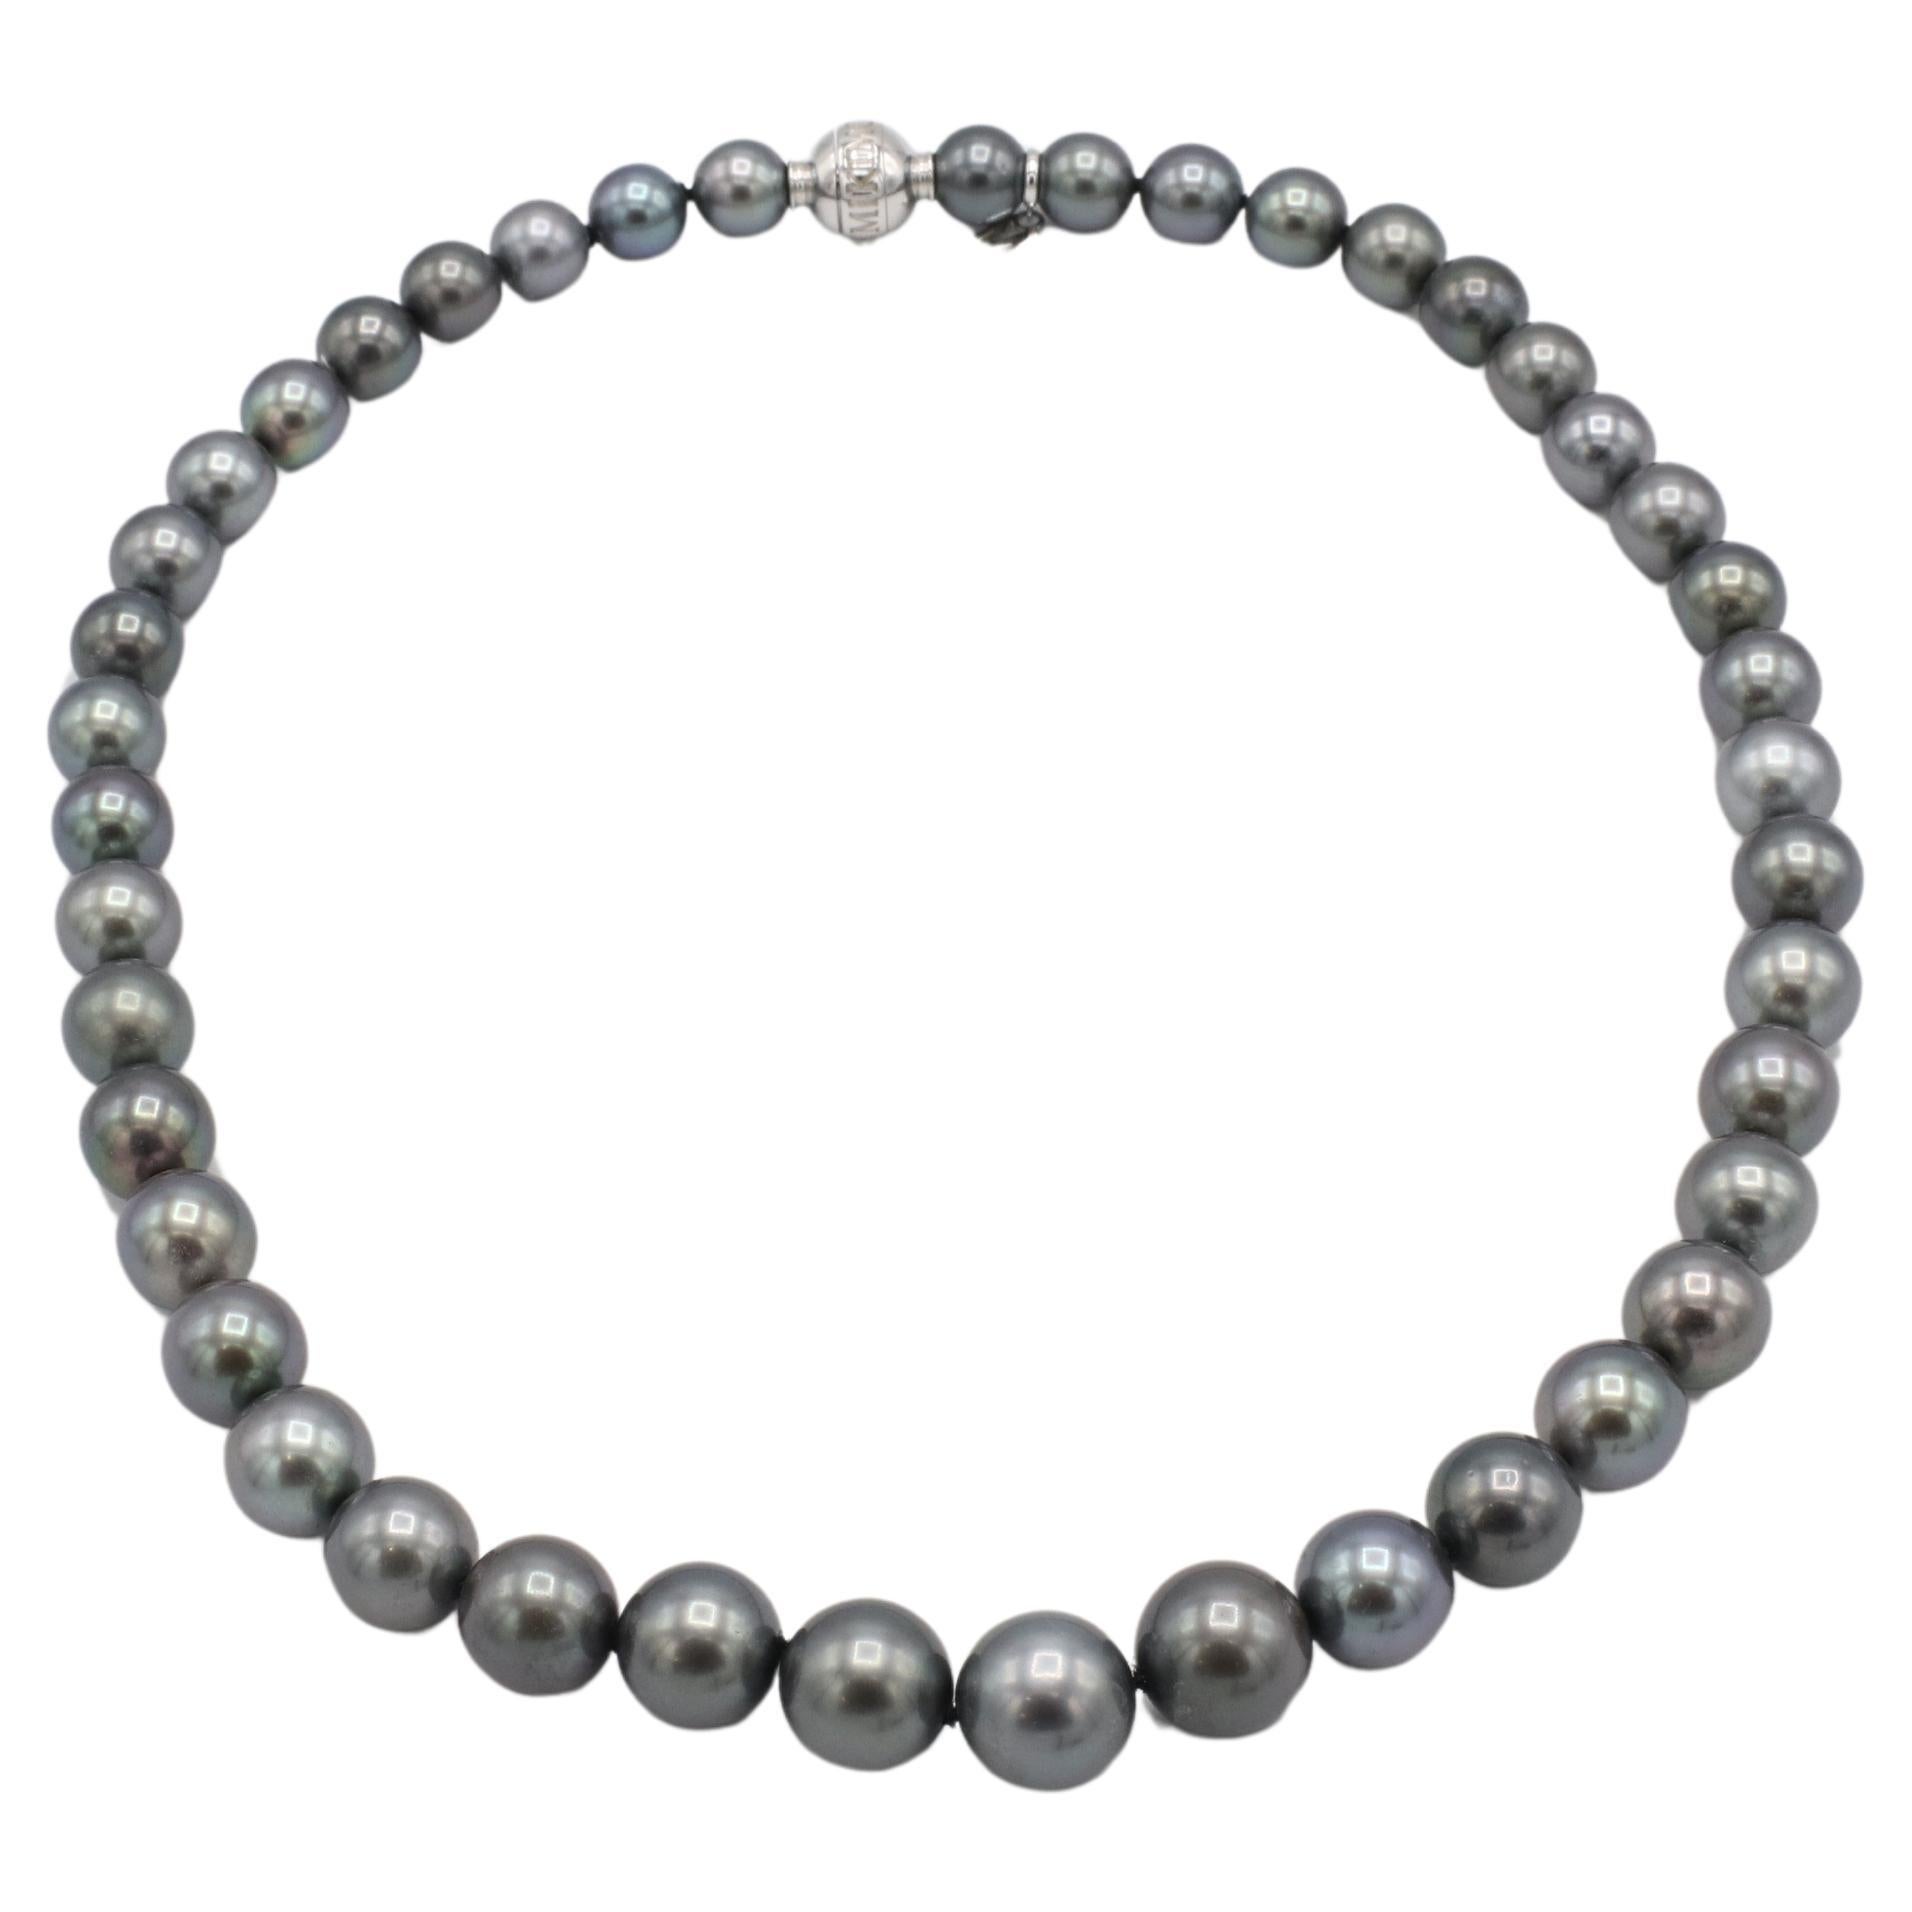 Mikimoto Black South Sea Cultured Pearl Necklace 18 Karat White Gold Diamond Clasp 
Metal: 18k white gold
Weight: 59.4 grams
Length: 17 inches
Pearls: 8 - 11mm
Diamond: Approx. 0.02 CT F VS round natural diamond
Retail: $14,000 USD
